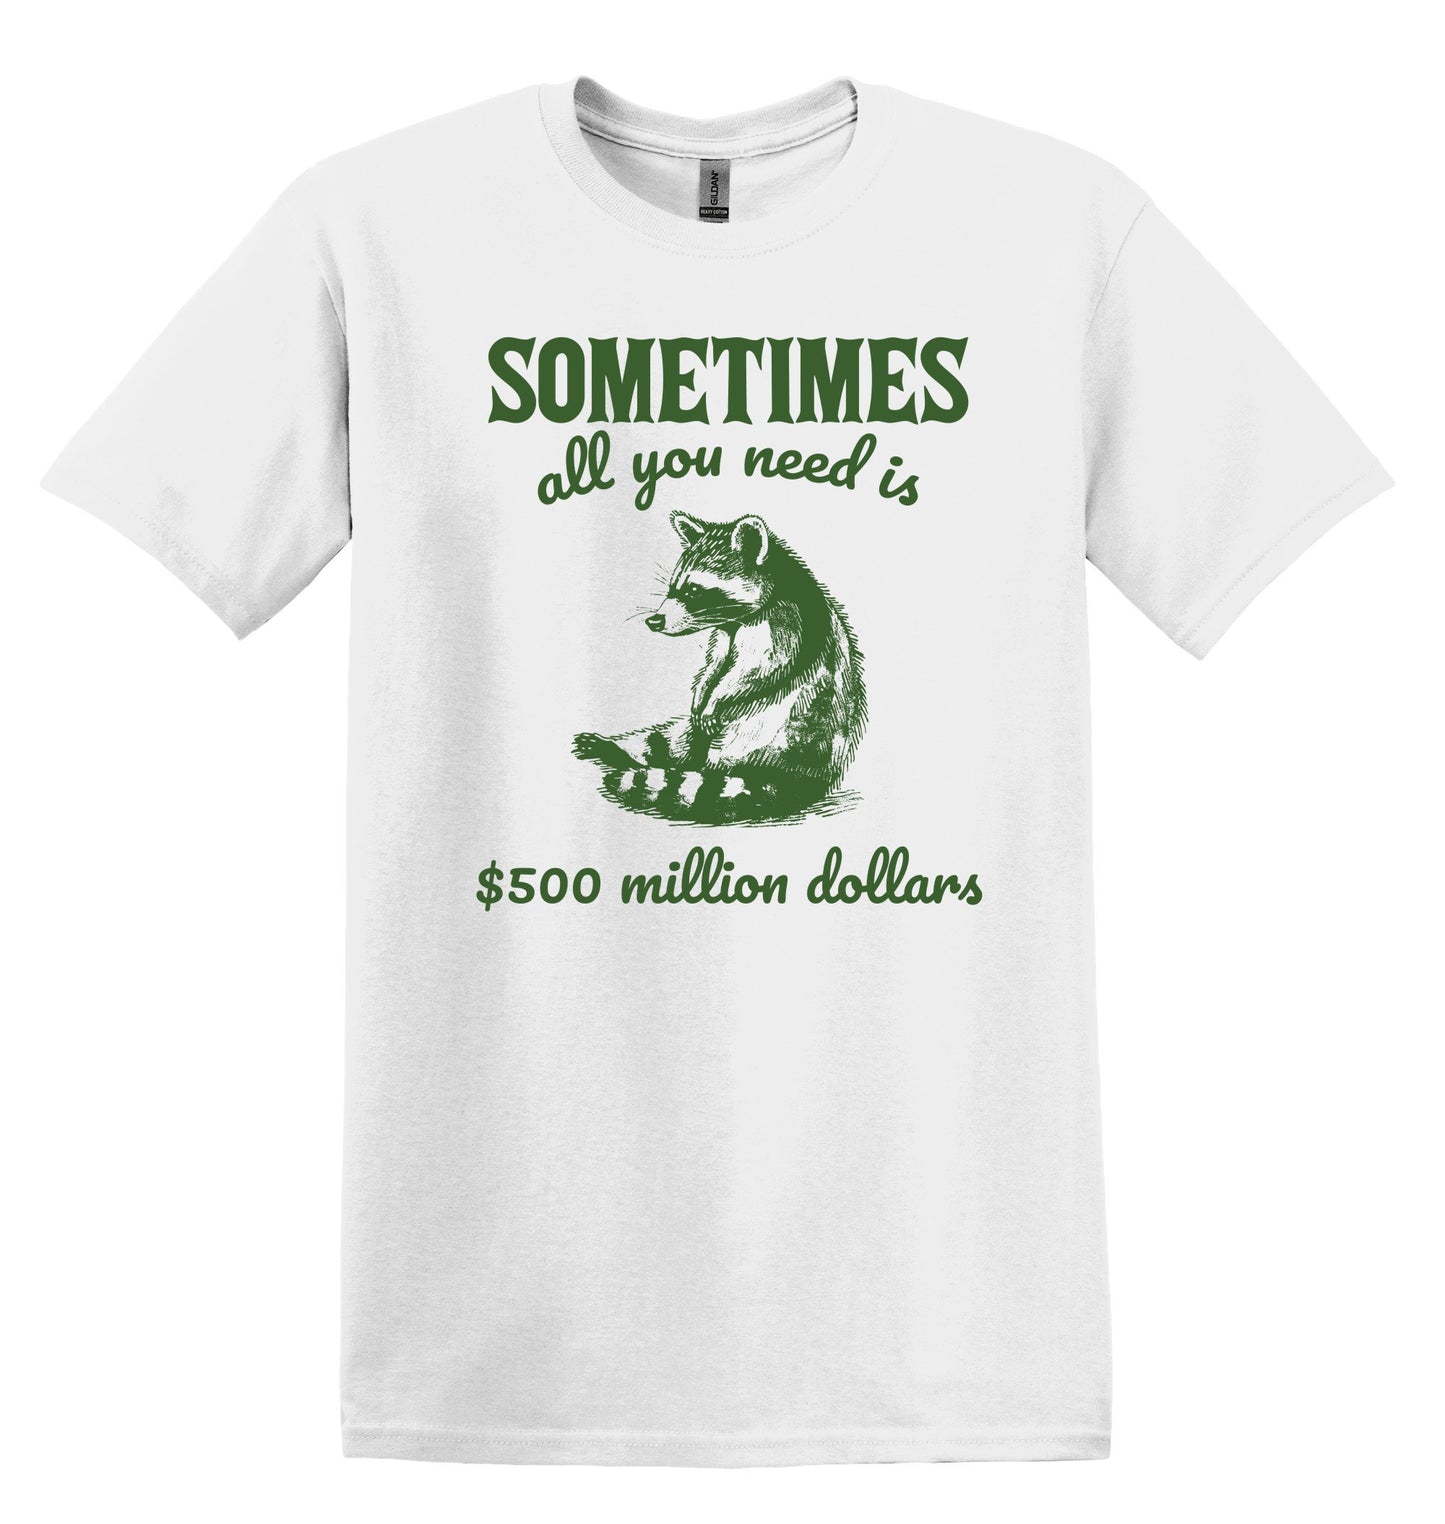 Sometimes all you need is 500 Million Dollars Raccoon Shirt - Funny Graphic Tee